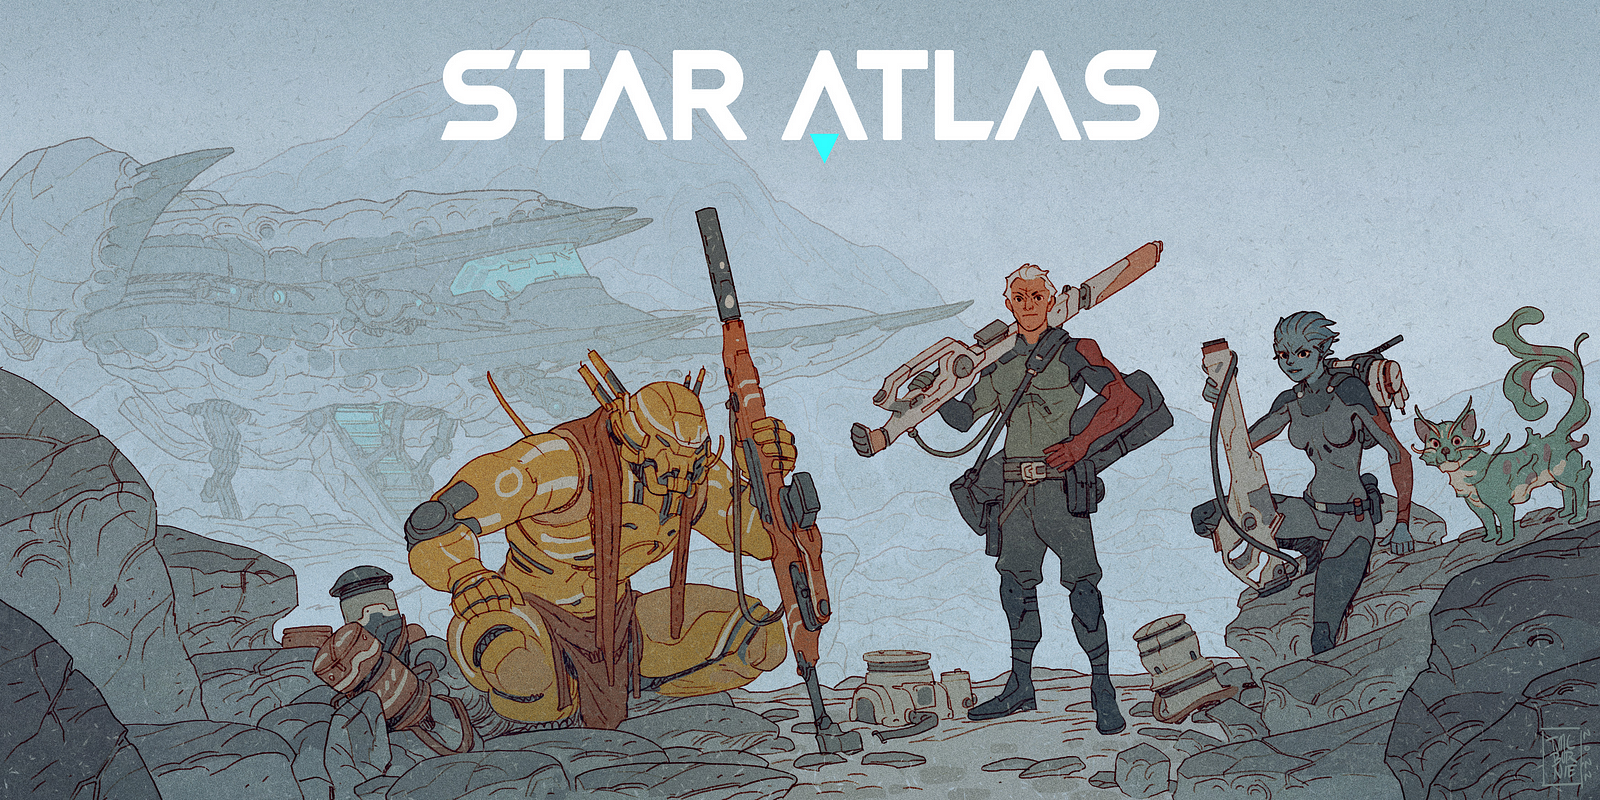 A depiction of the art used in the Star Atlas graphic novel